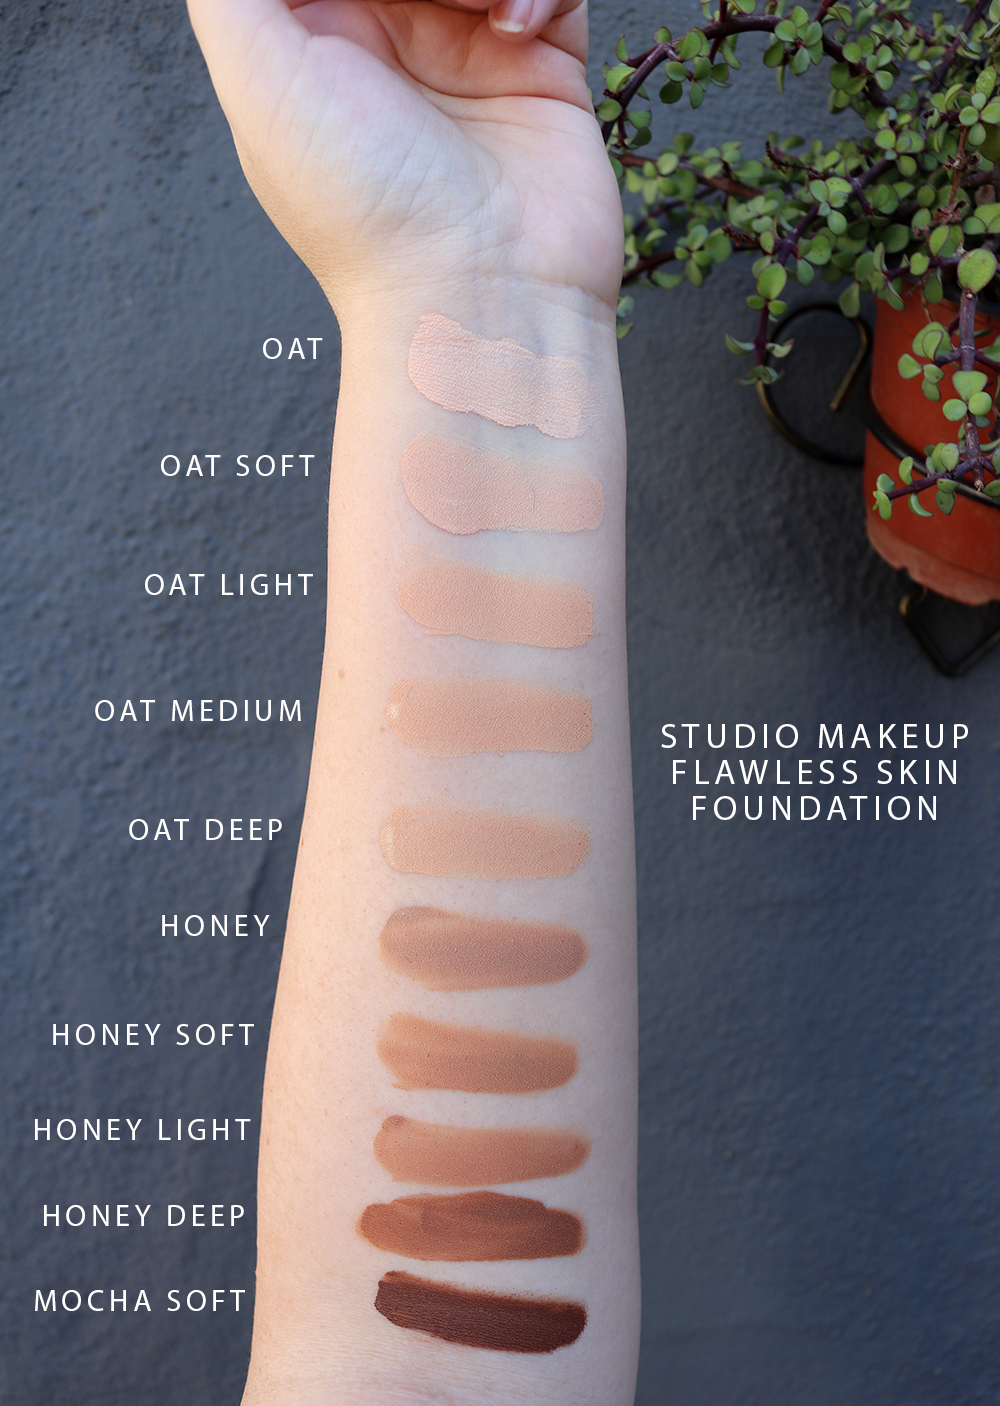 Studio Makeup Flawless Skin Foundation Swatches